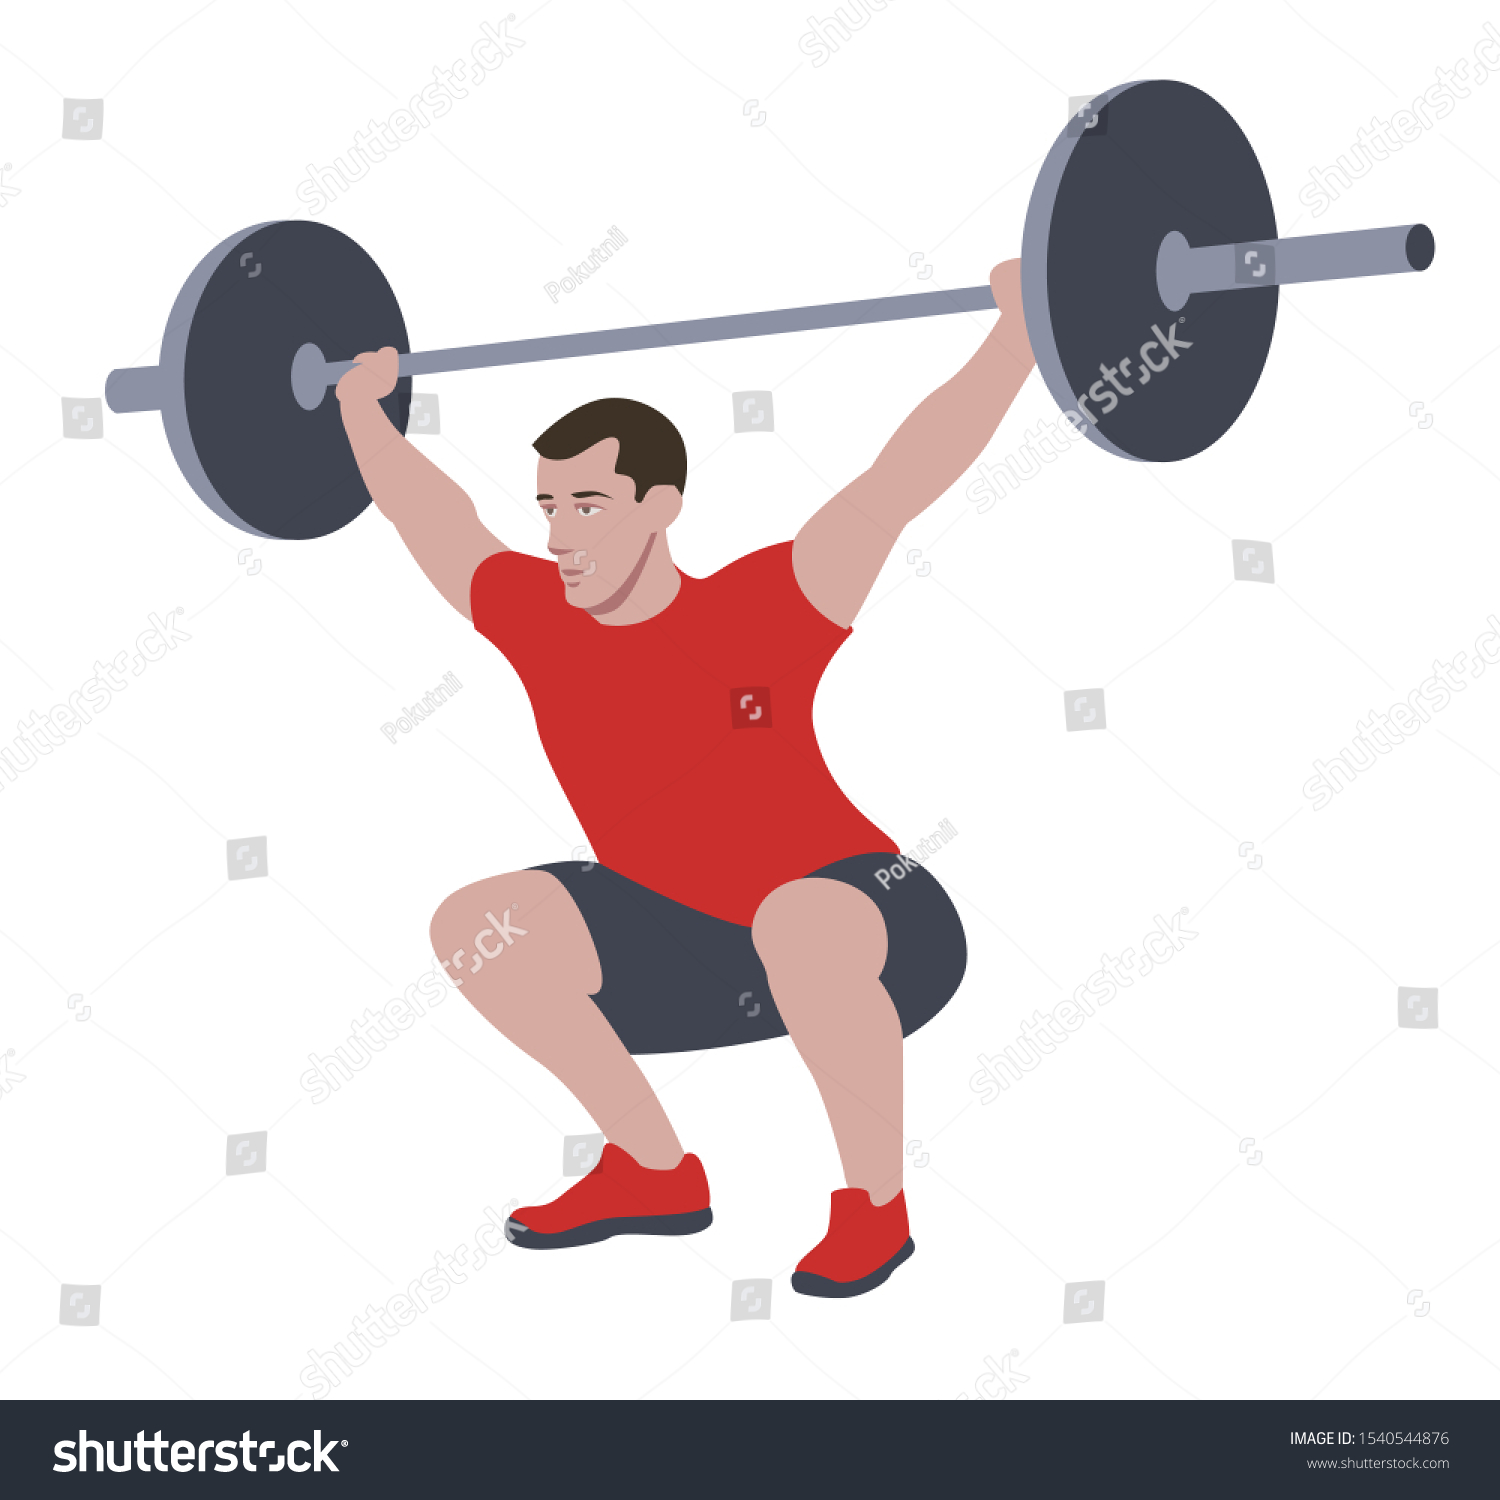 SVG of CrossFit workout training for open games championship. Sport man training Olympic heavy weight barbell squat snatch exercise in the gym for healthy beautiful body shape motivation. svg